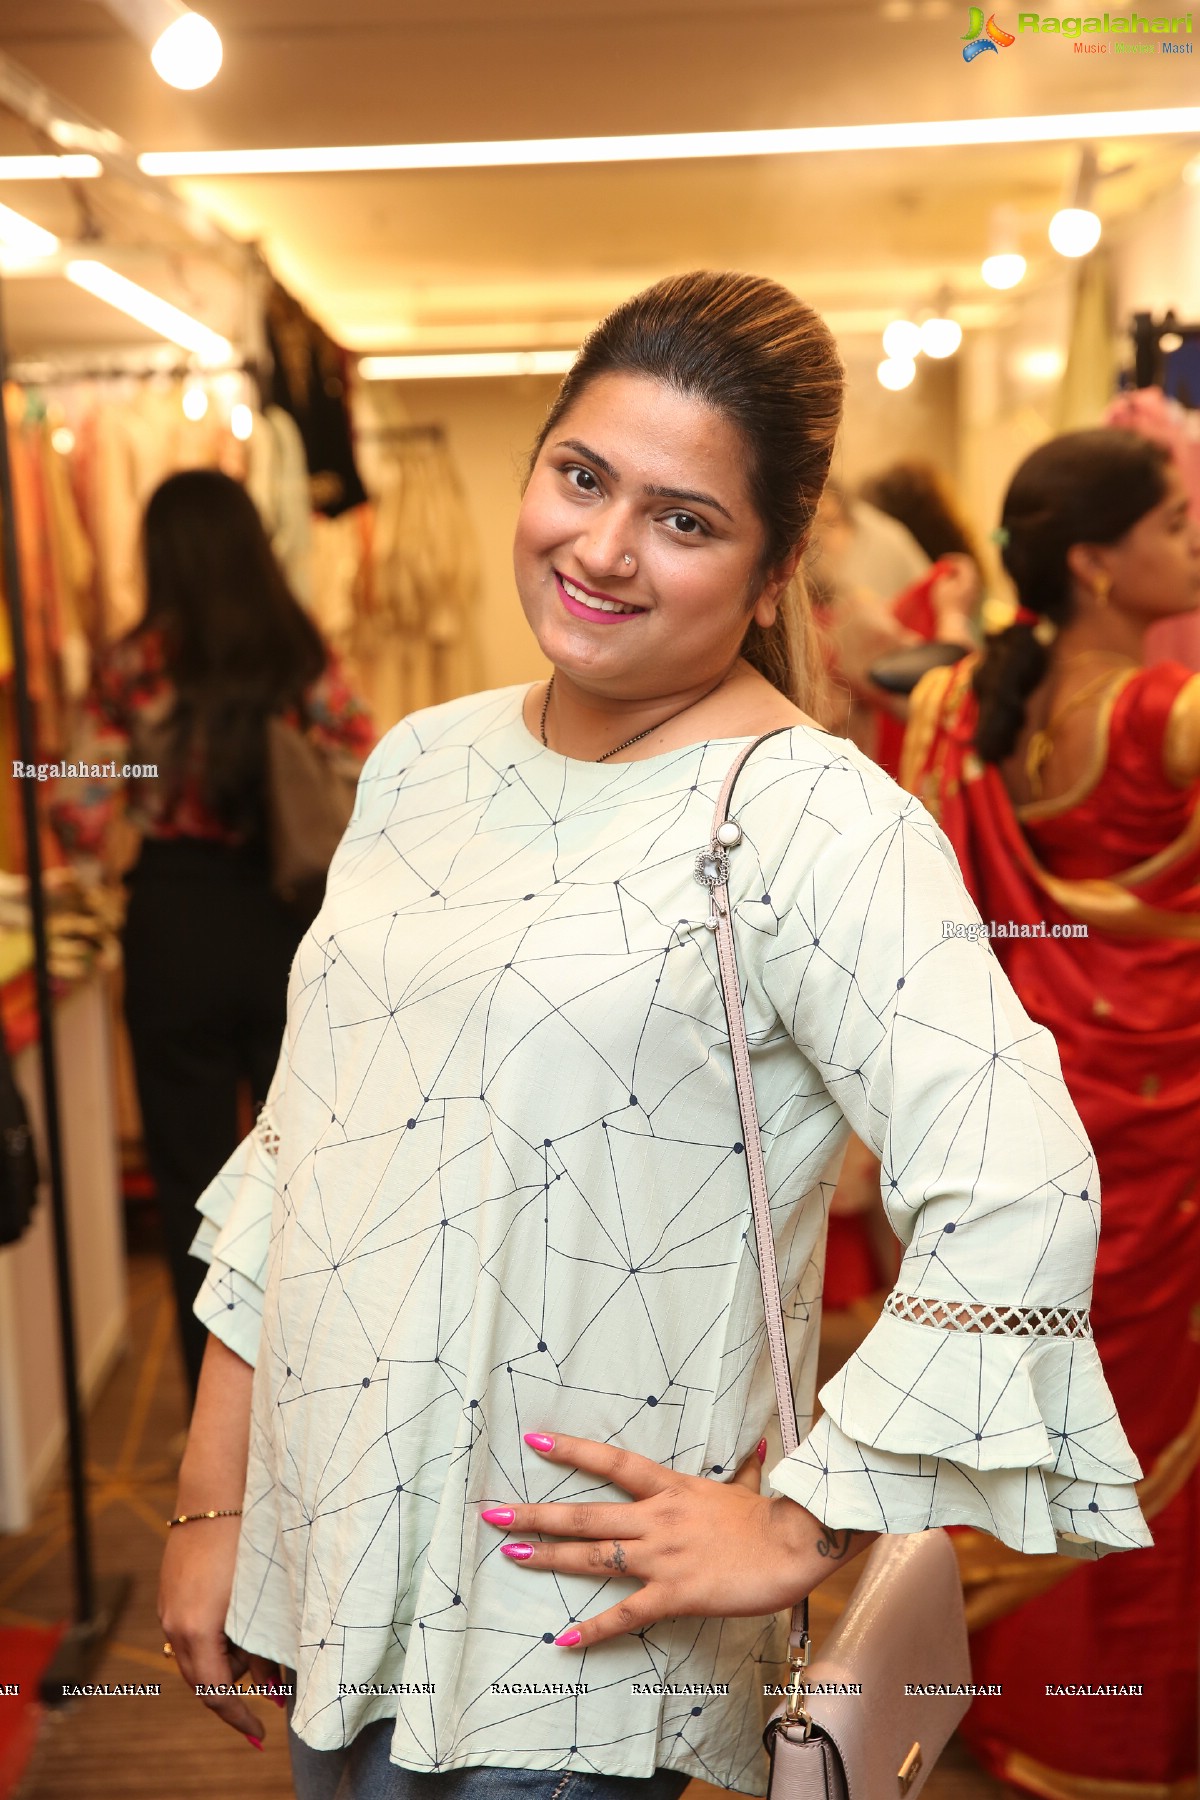 Label Love Exhibition and Sale March 2020 Kicks Off at Hyatt Place, Hyderabad